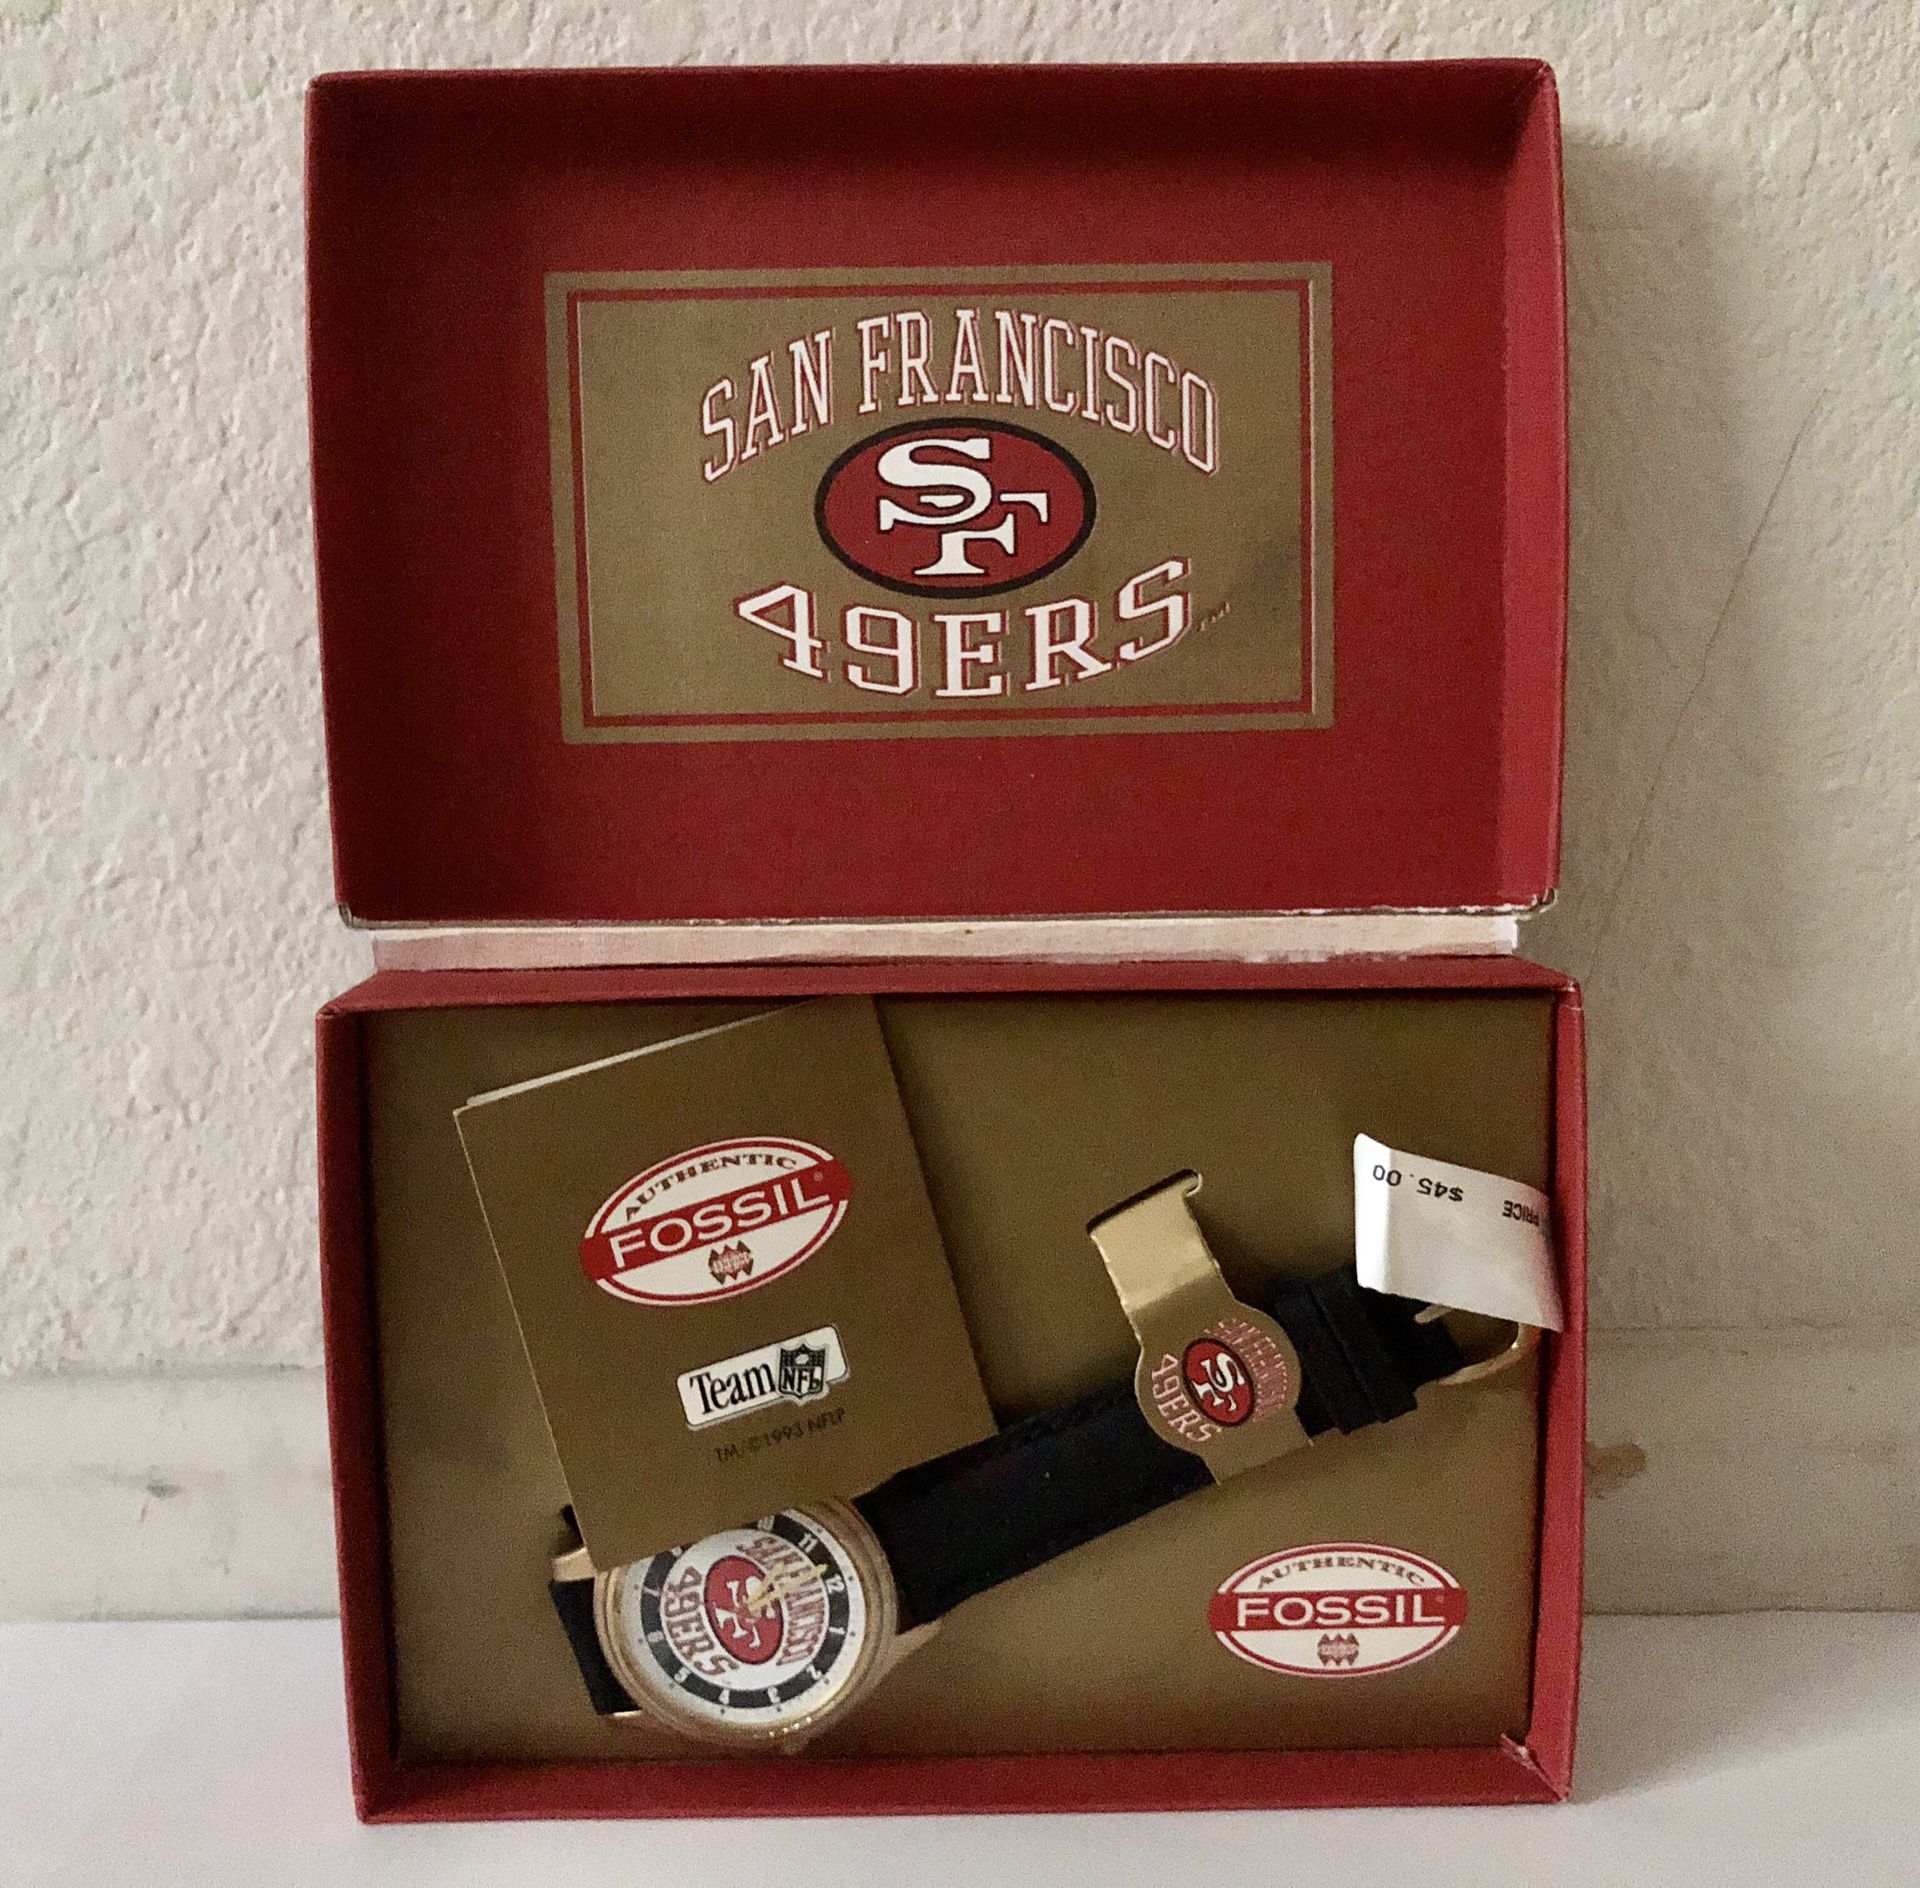 RARE, VINTAGE! - 1993 FOSSIL NFLP San Francisco 49ers Wristwatch WITH Box!